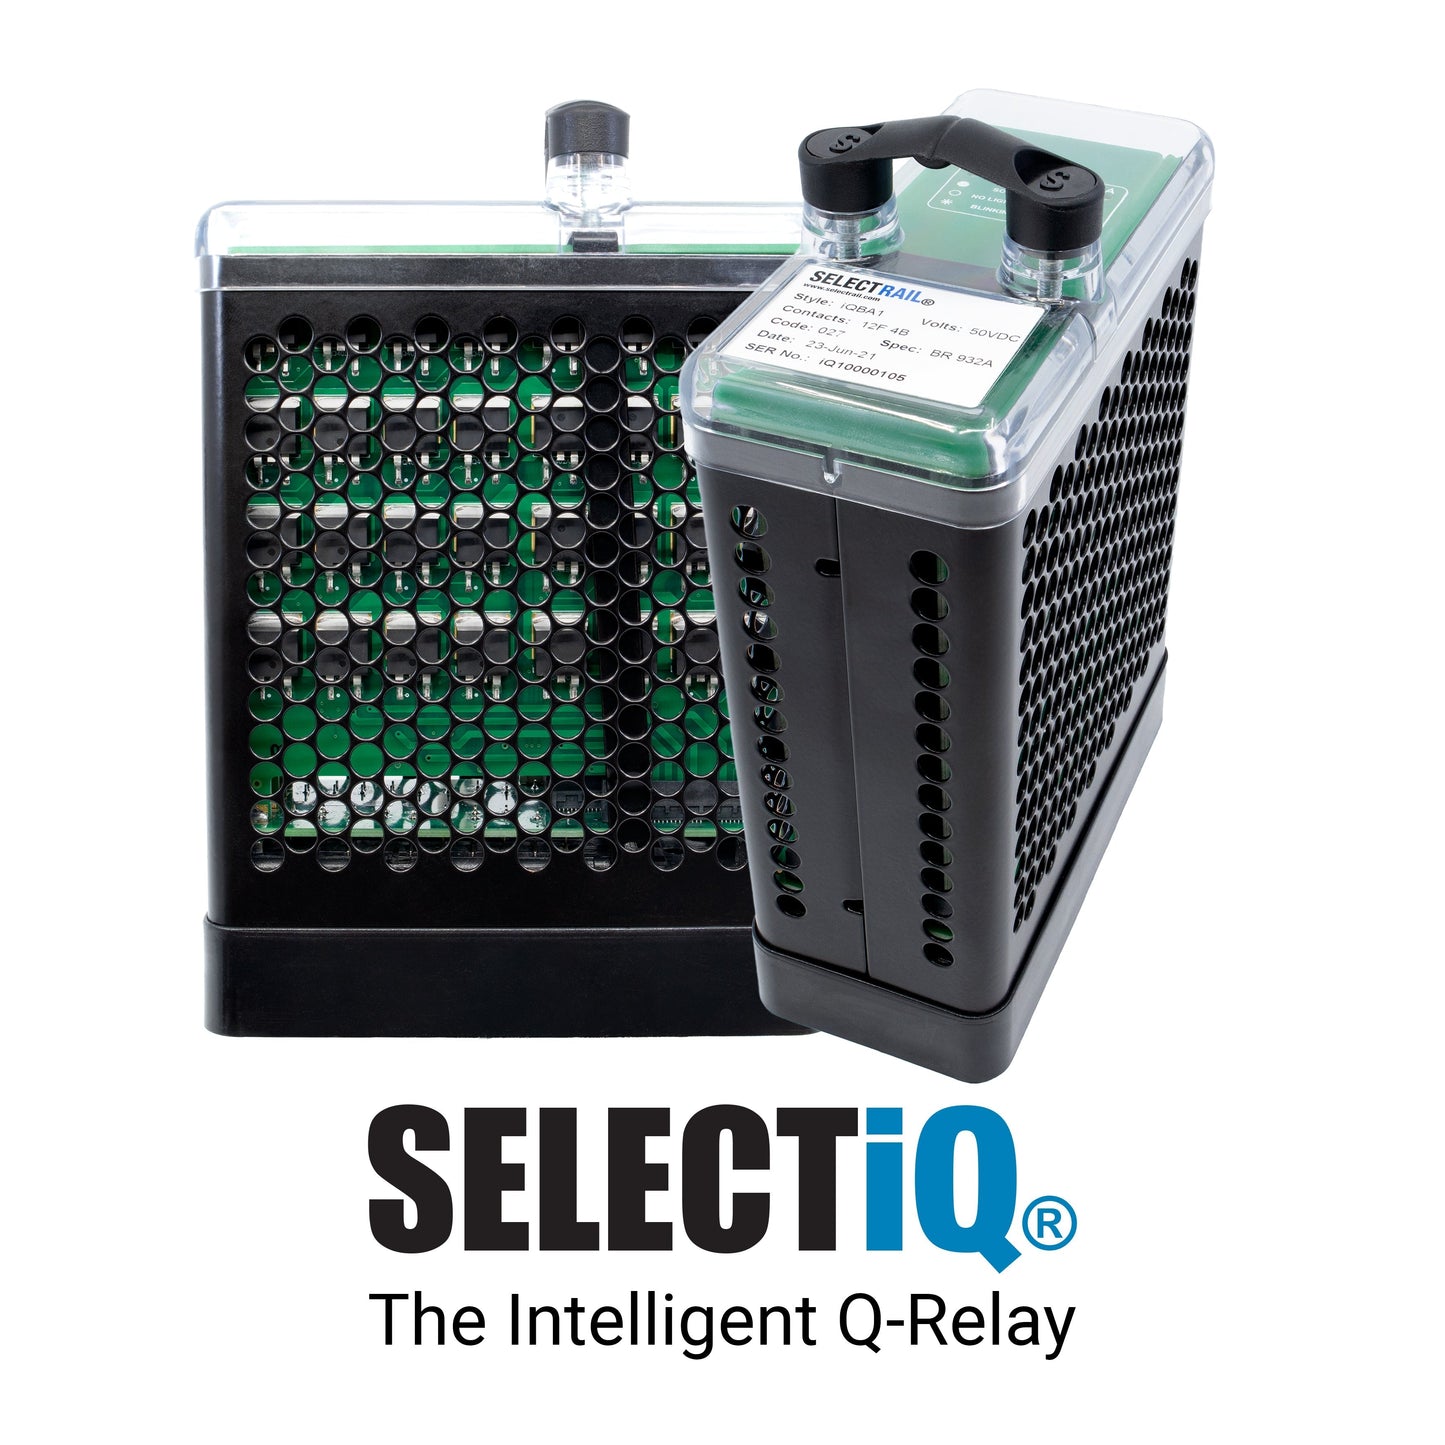 SELECTiQ Solid State Q-Relay (iQNA1)